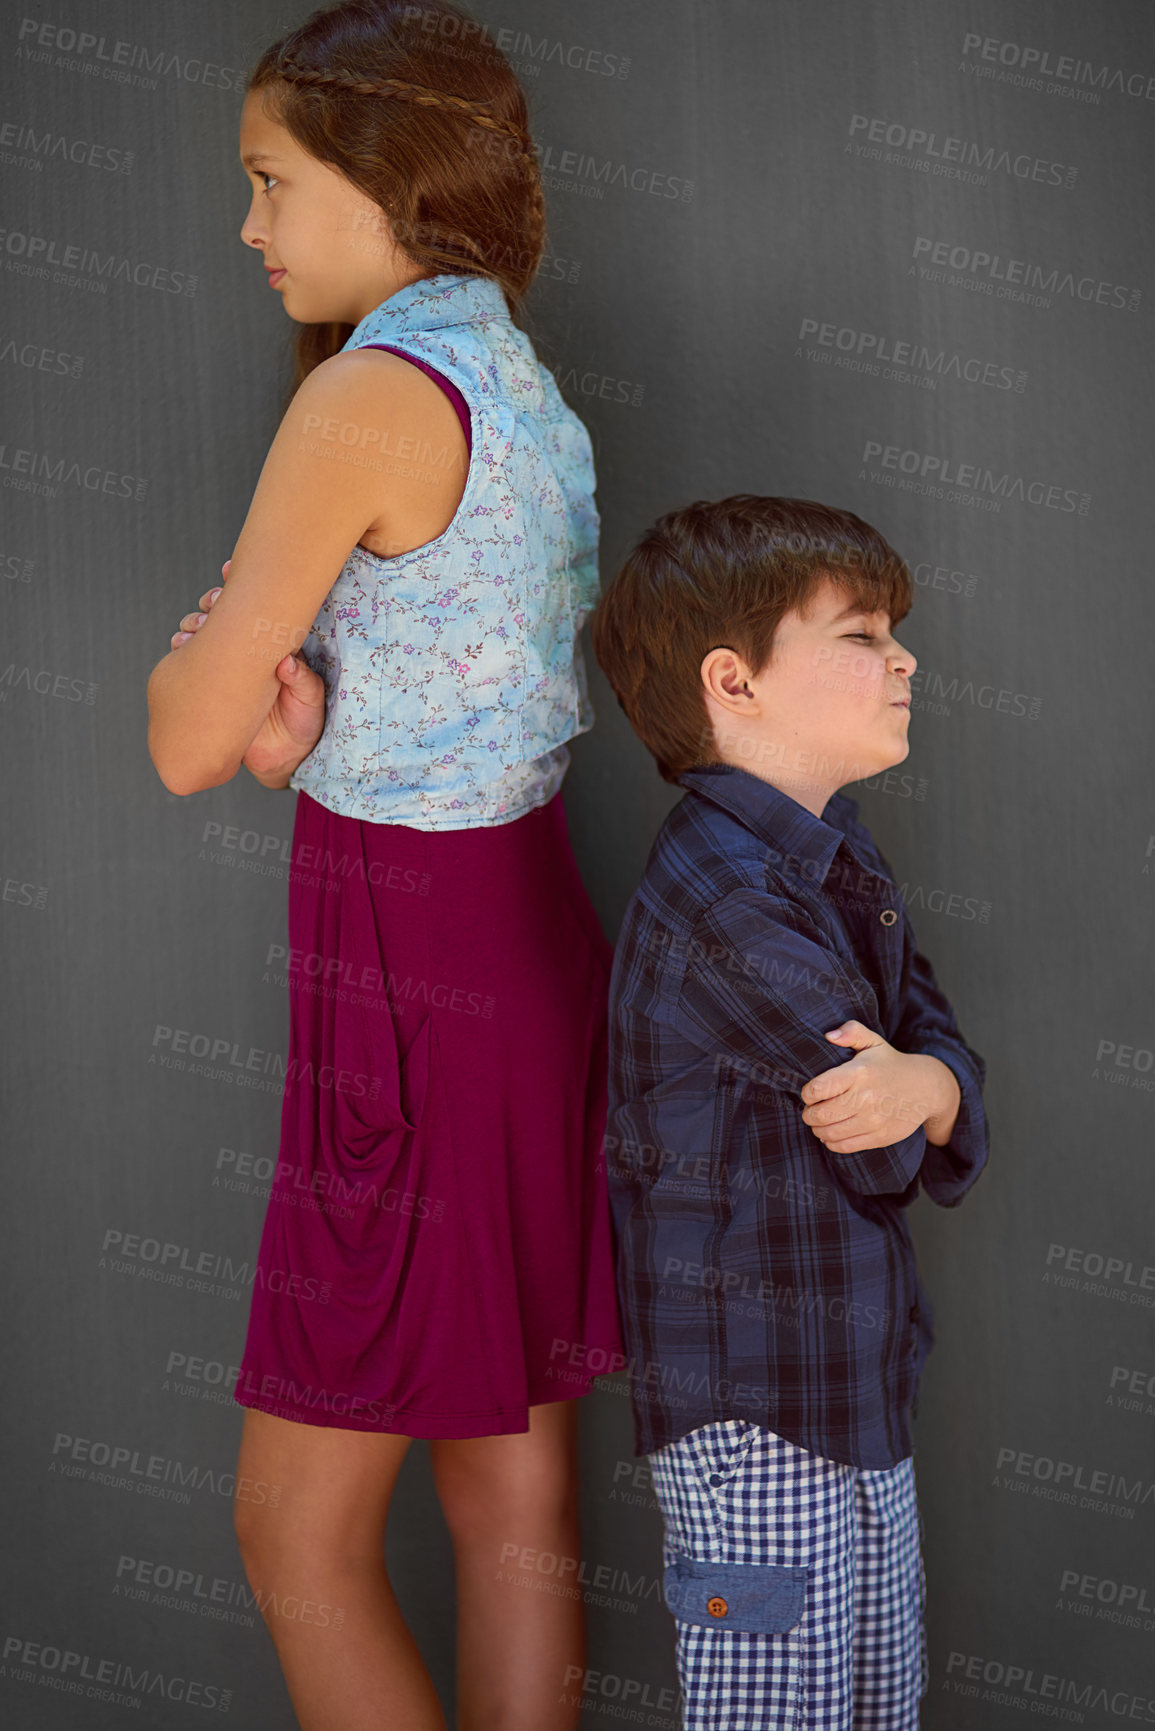 Buy stock photo Studio shot of a young brother and sister standing back to back against a gray background